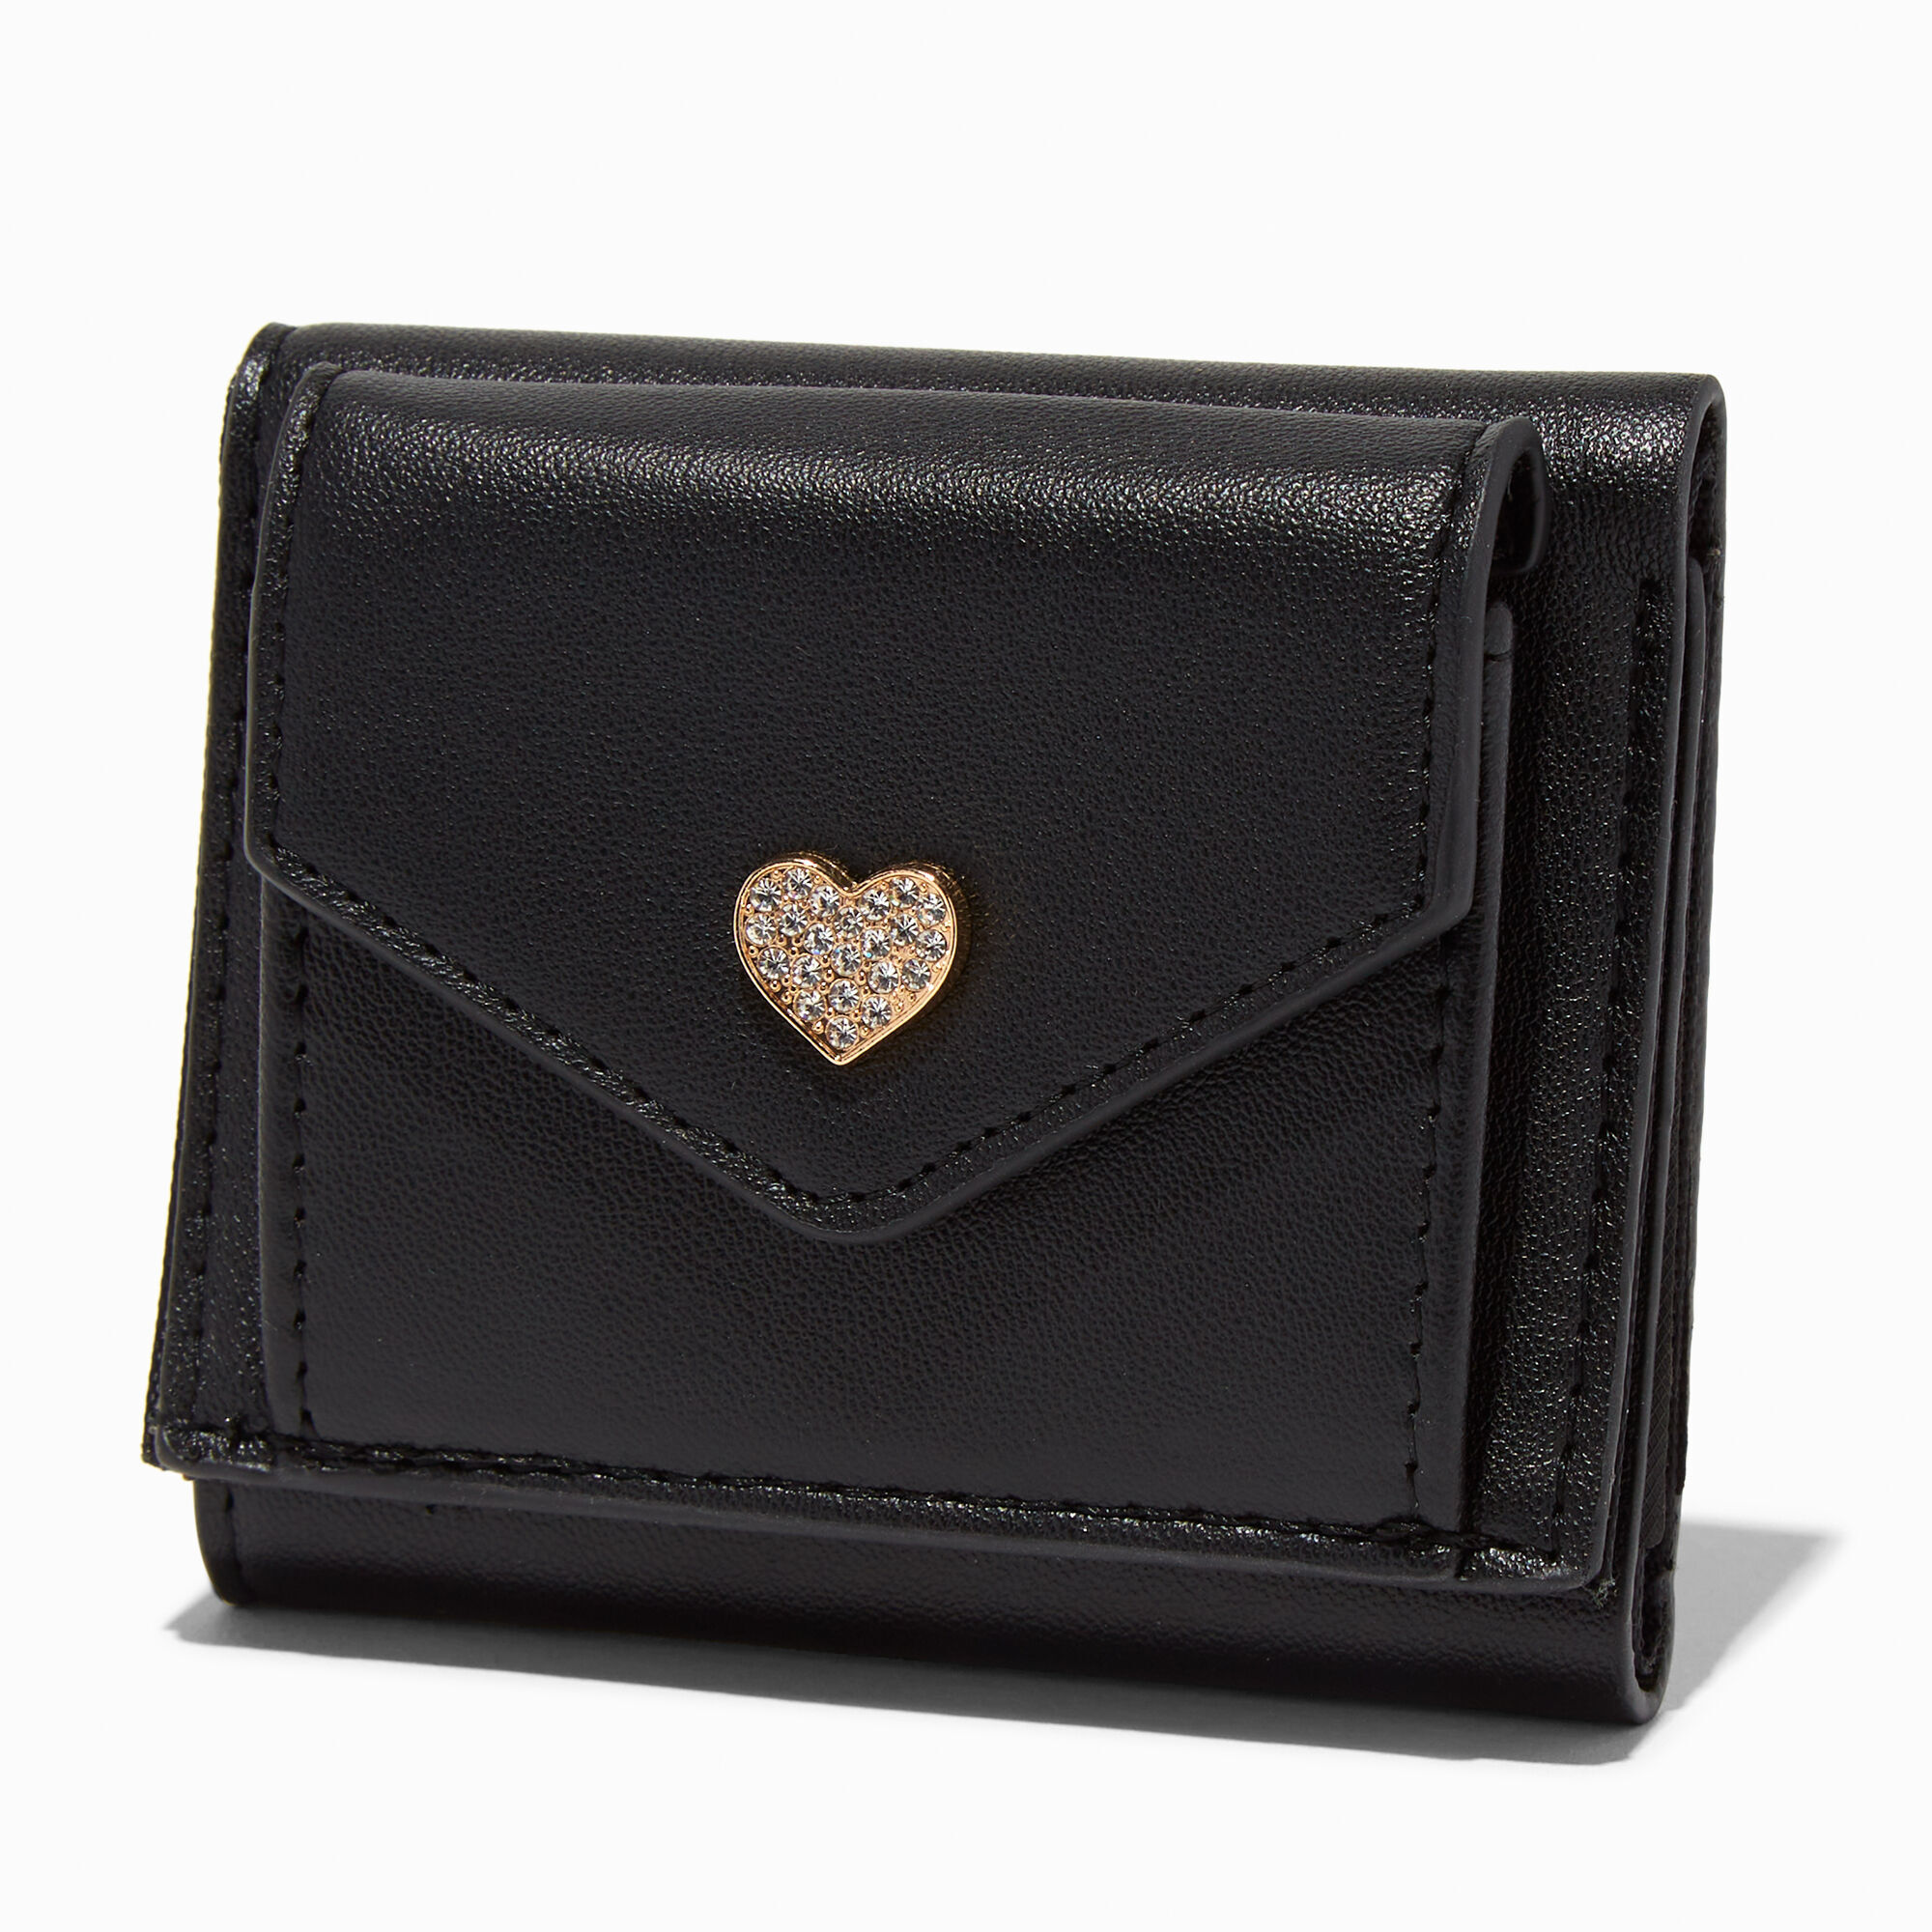 View Claires Heart Trifold Wallet Black information